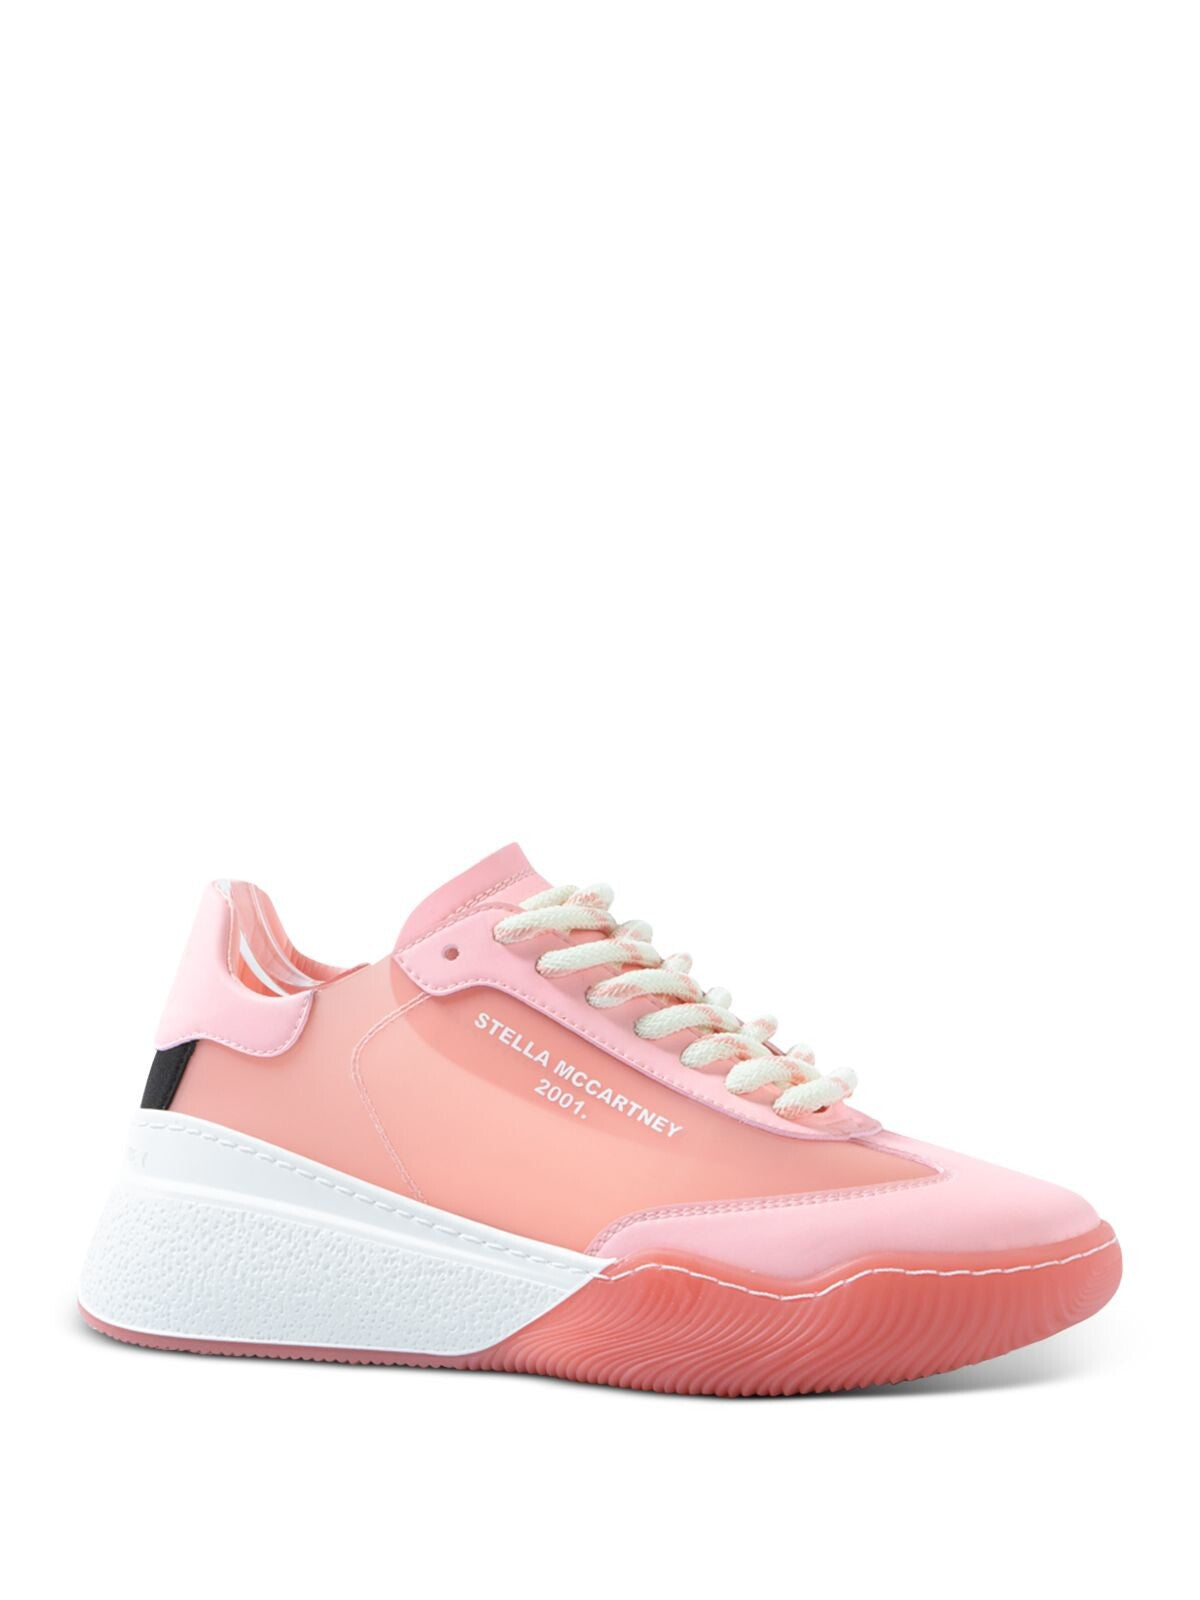 STELLAMCCARTNEY Womens Pink Translucent Logo Removable Insole Loop Round Toe Wedge Lace-Up Athletic Sneakers Shoes 35